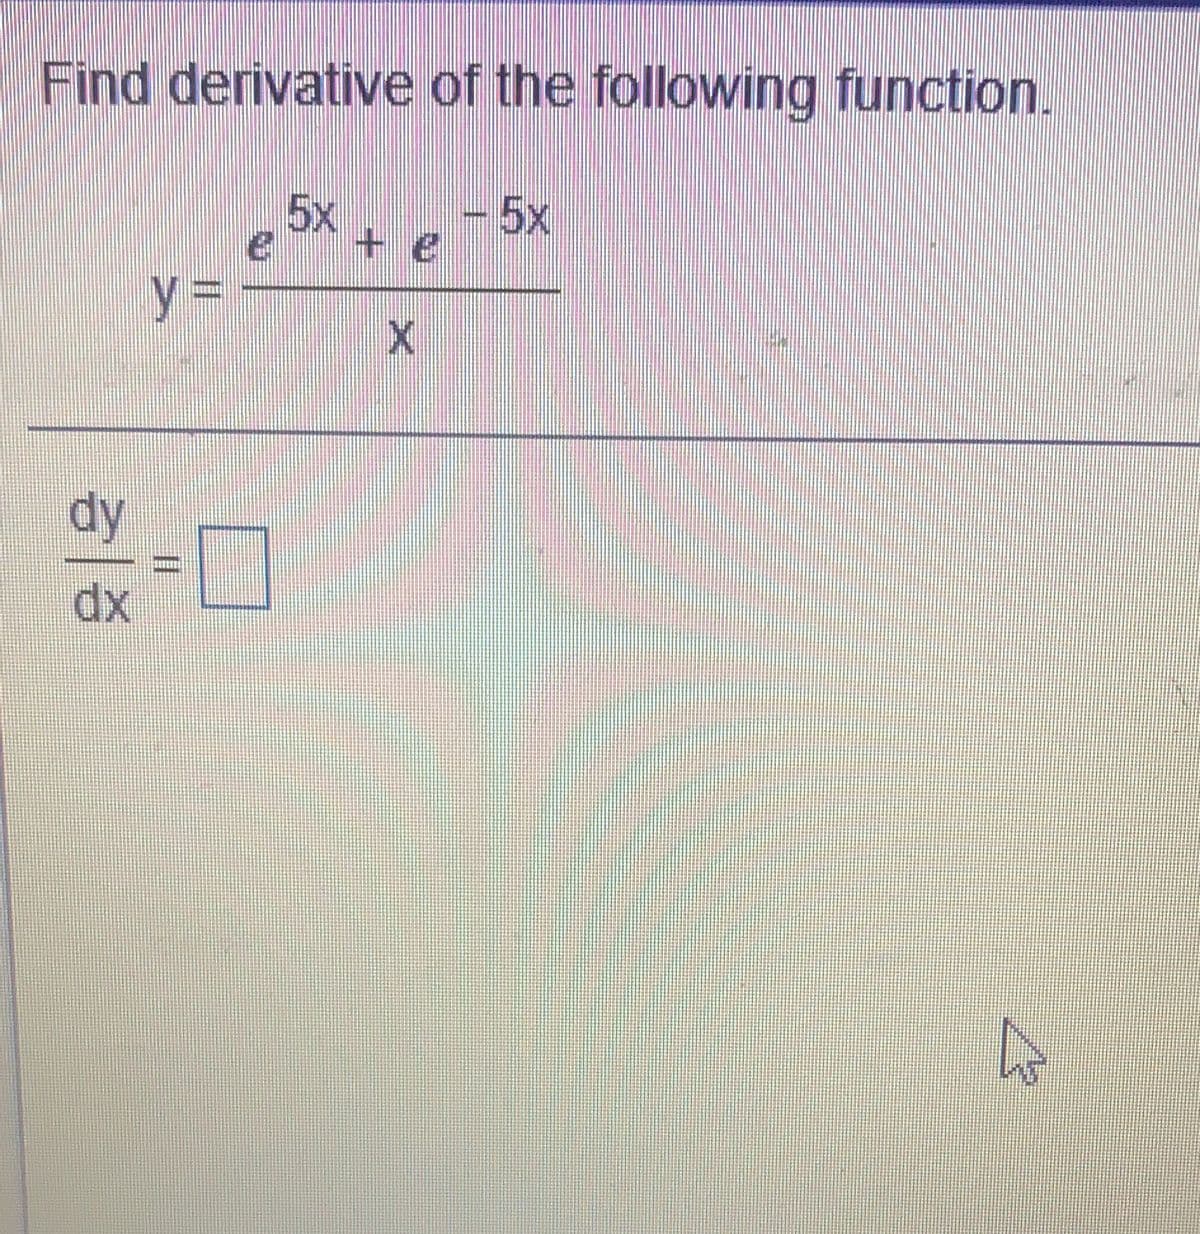 Find derivative of the following function.
-5x
5x + e
y3D
dy
dx
